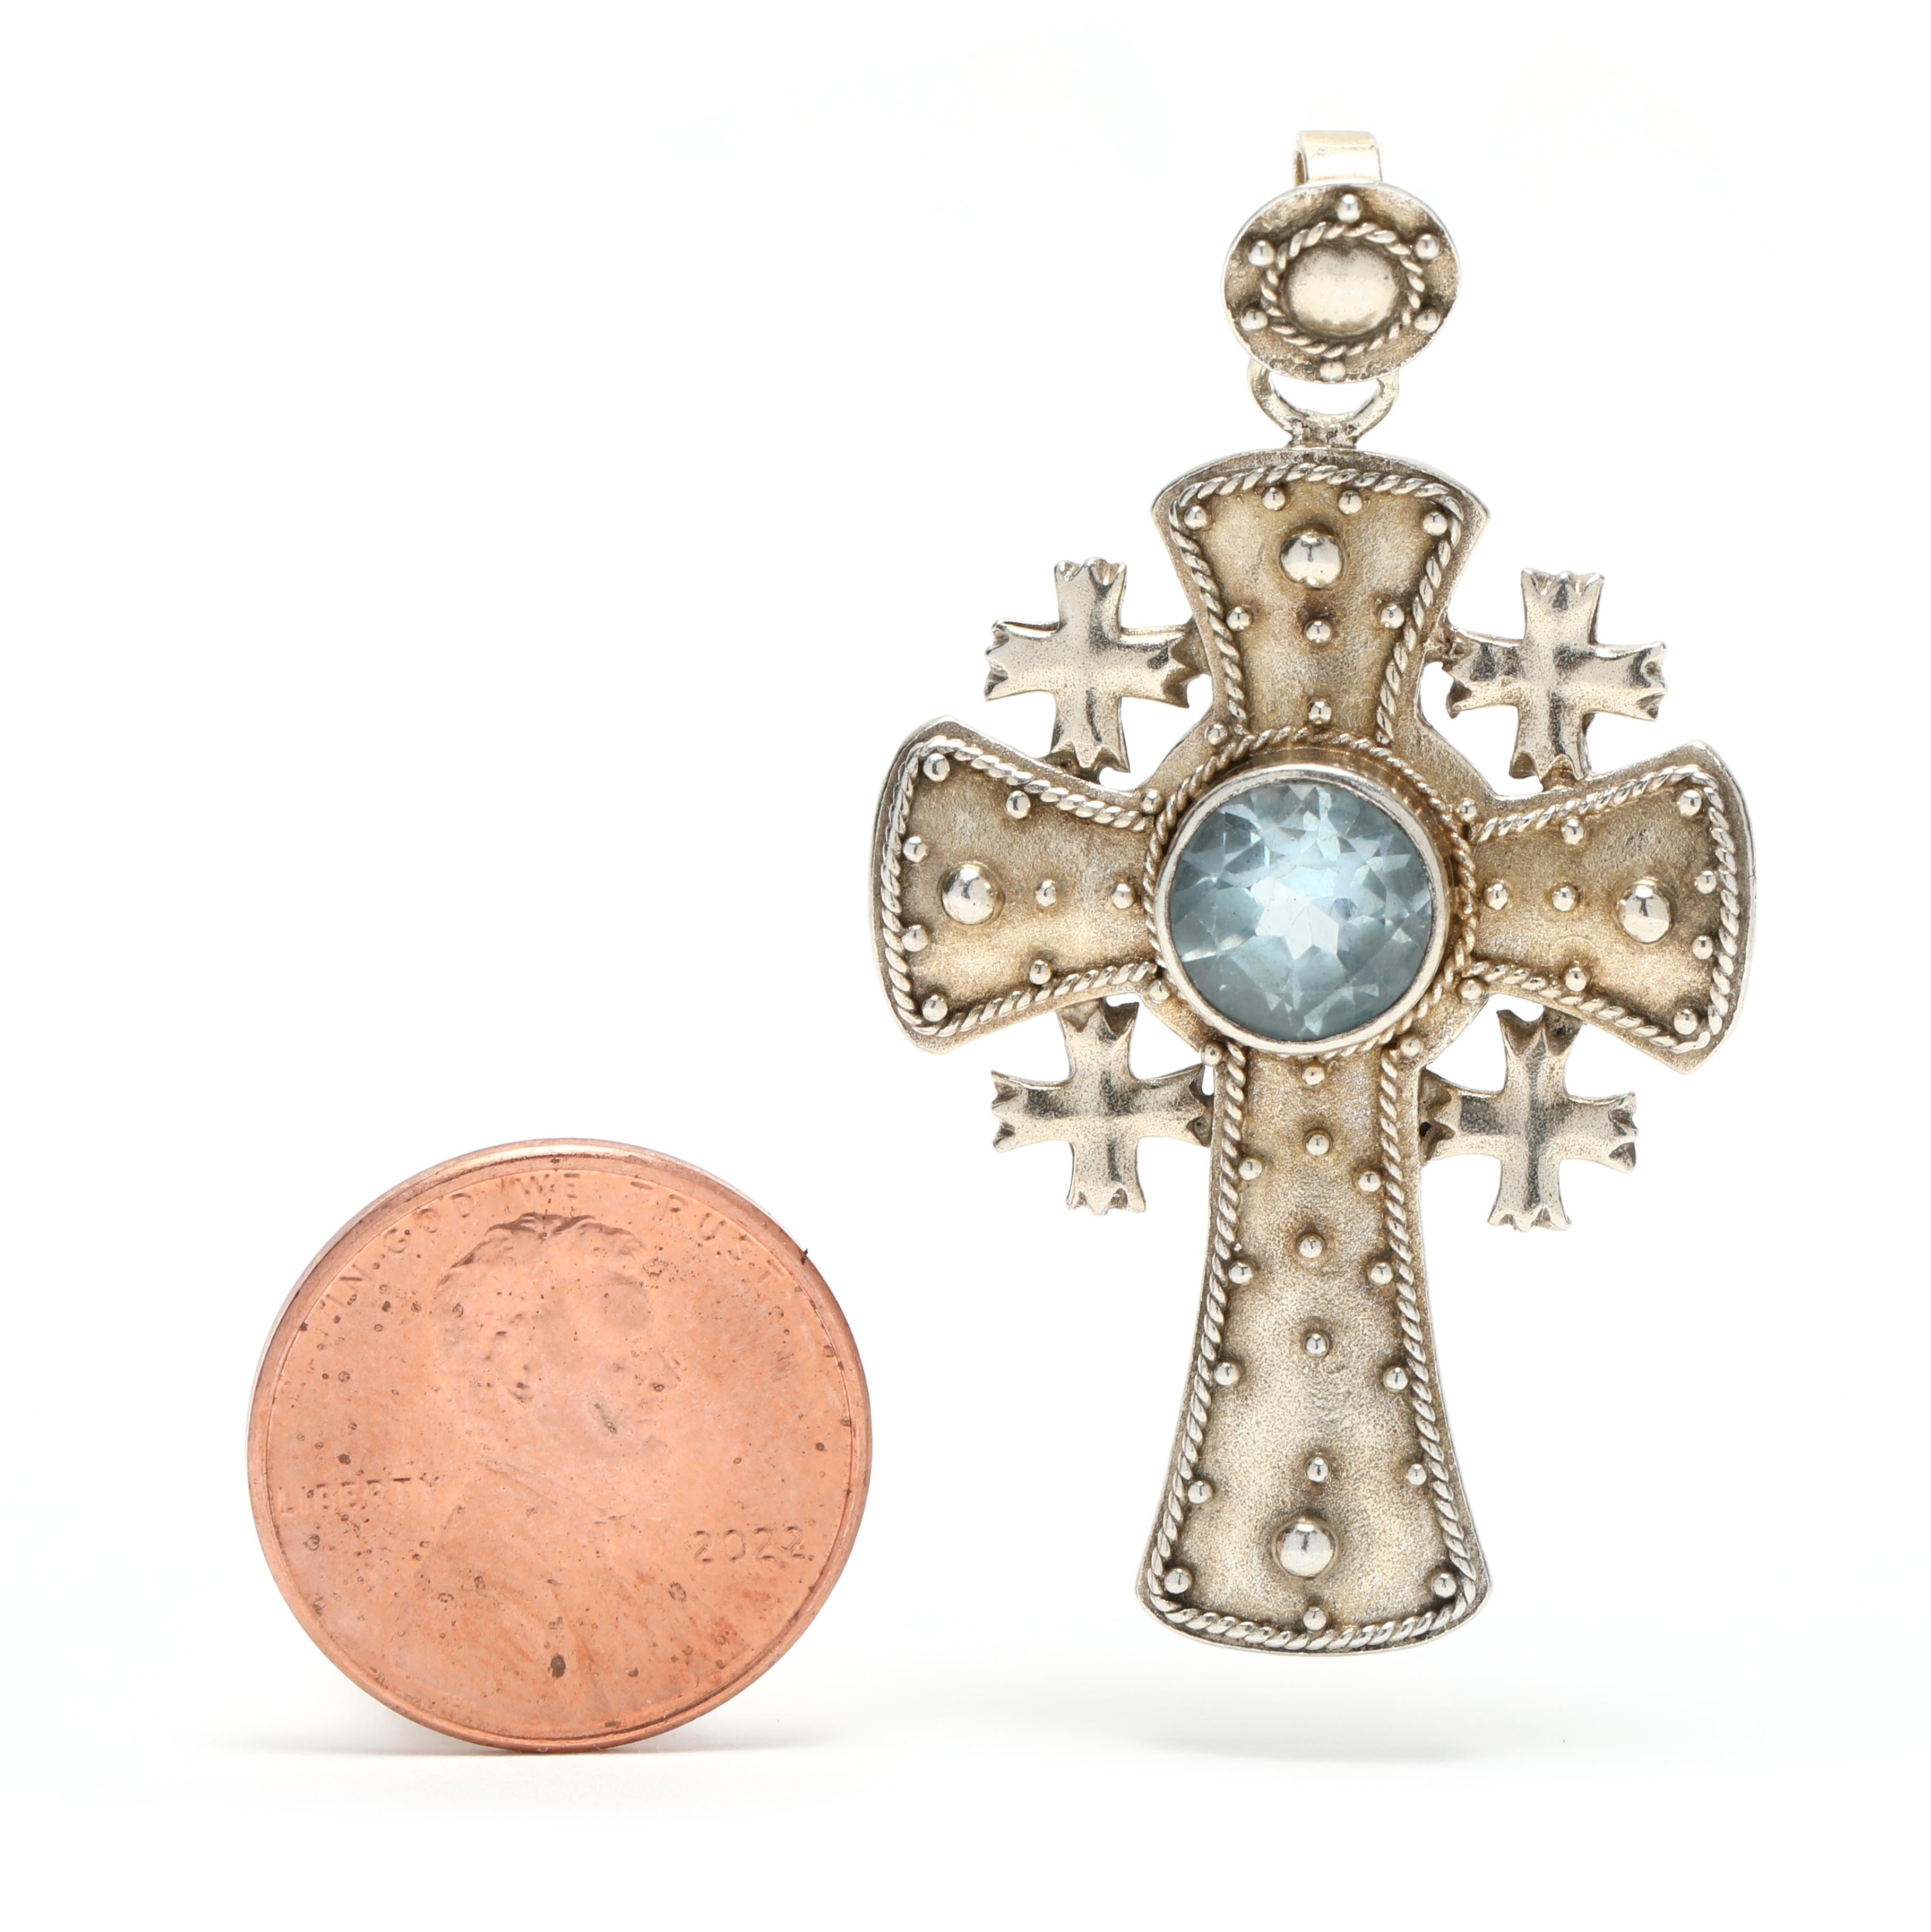 This stunning vintage cross pendant is made from sterling silver and features a large 2.5ct blue topaz gemstone. The beaded design of the cross is eye-catching and the length of the pendant is 1.75 inches. This beautiful pendant is perfect for